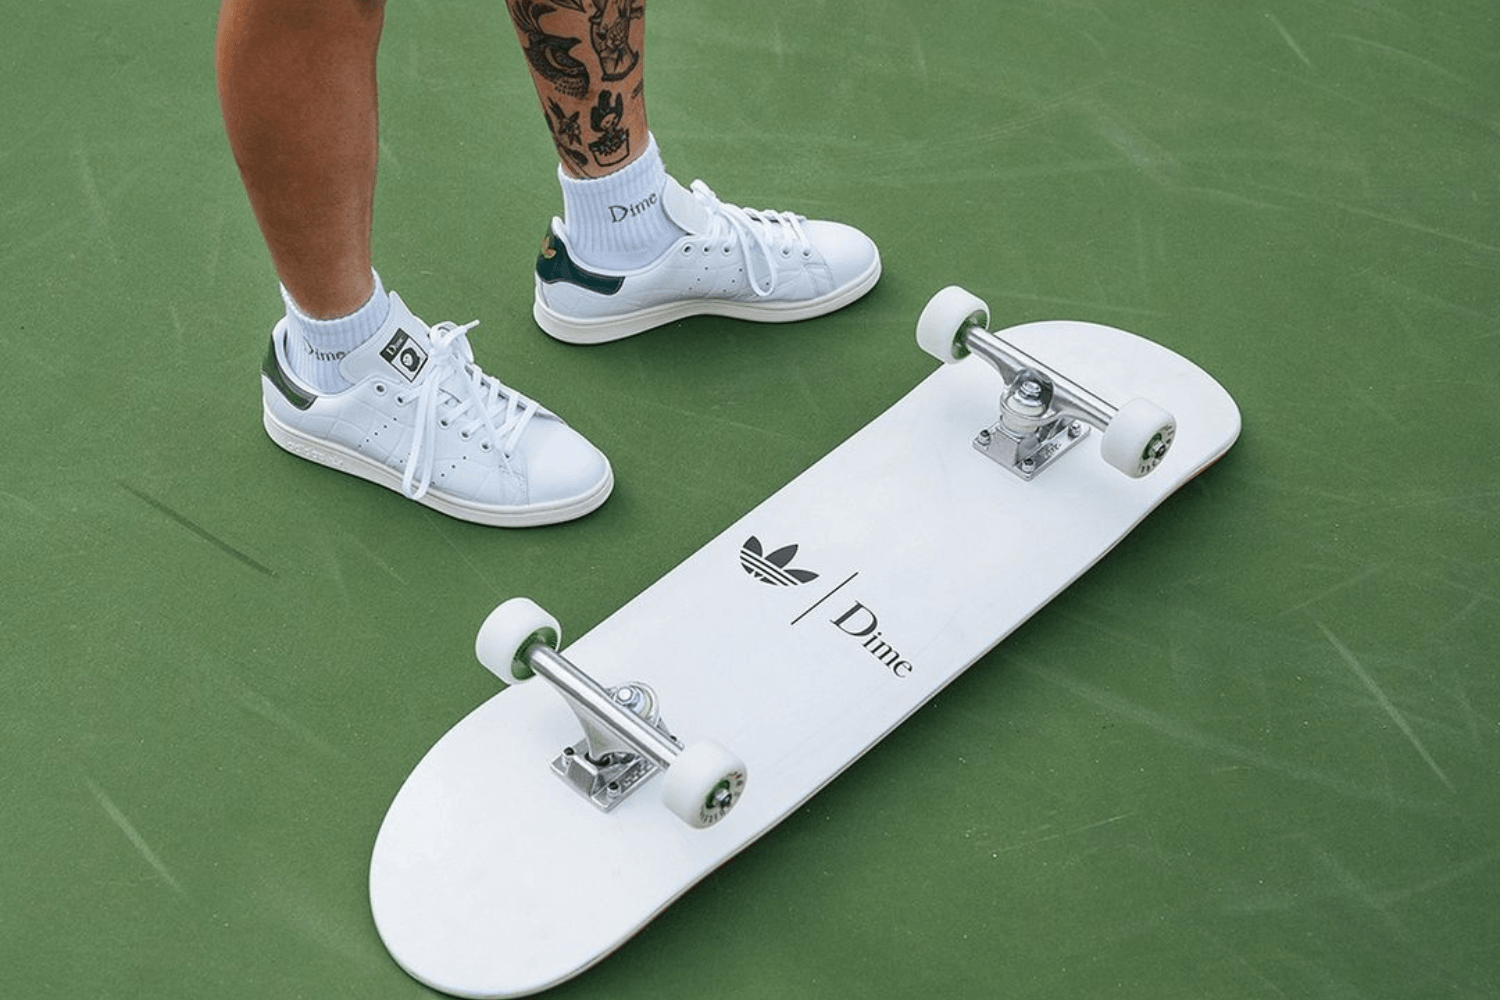 Dime and adidas bring tennis and skateboarding together in next campaign